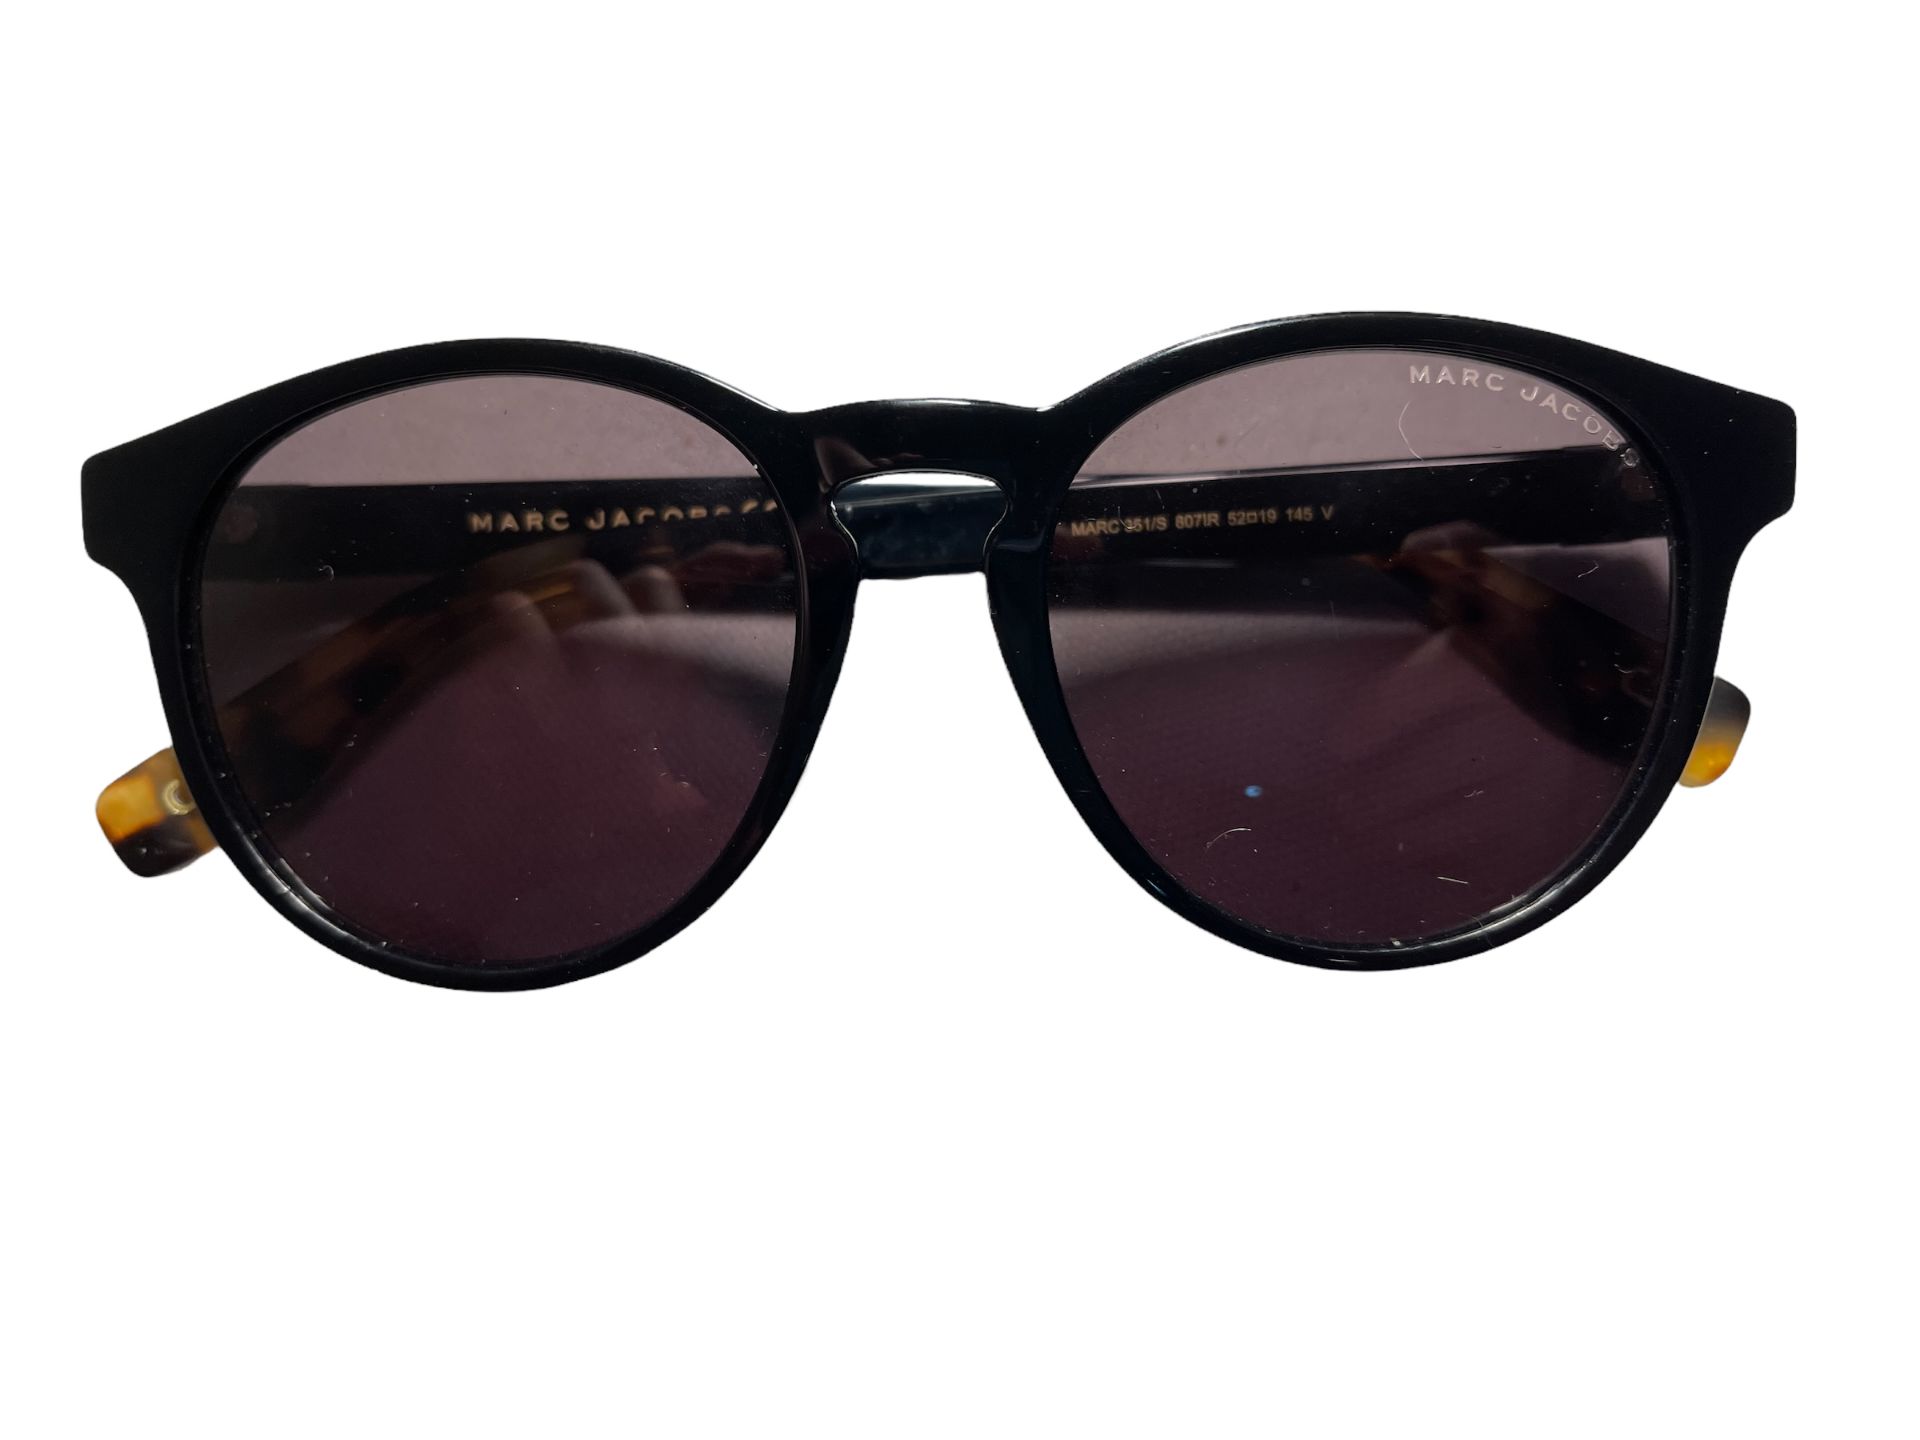 Marc Jacobs Ladies Sunglasses - Ex Demo or Surplus Stock from our Private Jet Charter - Image 2 of 10